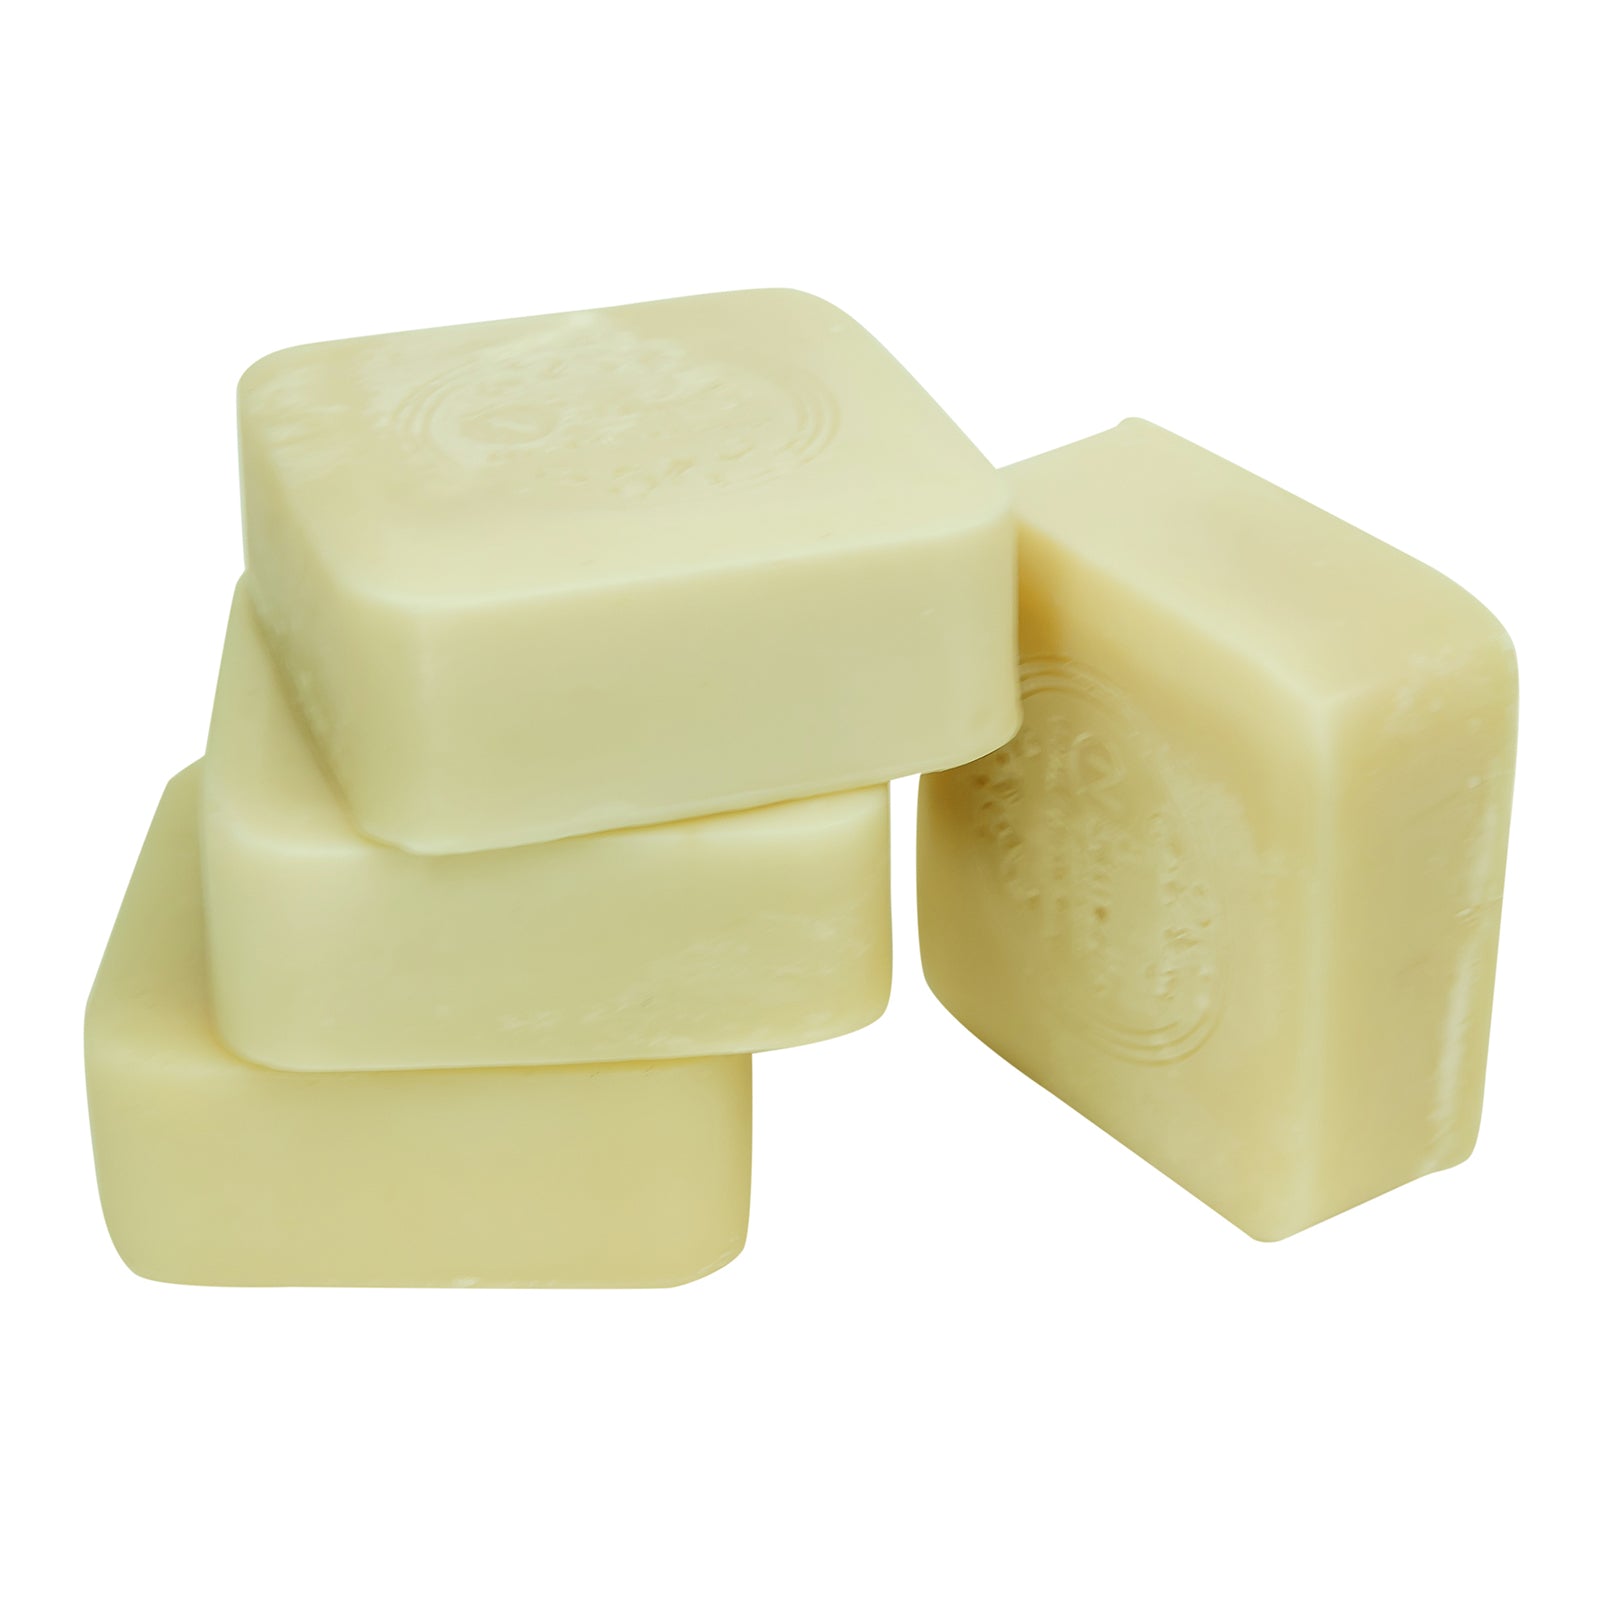 Hand-Milled Luxury Cardamom Solid Soap Bar, Made using century old Cold Process Method 100gms Pack of 4